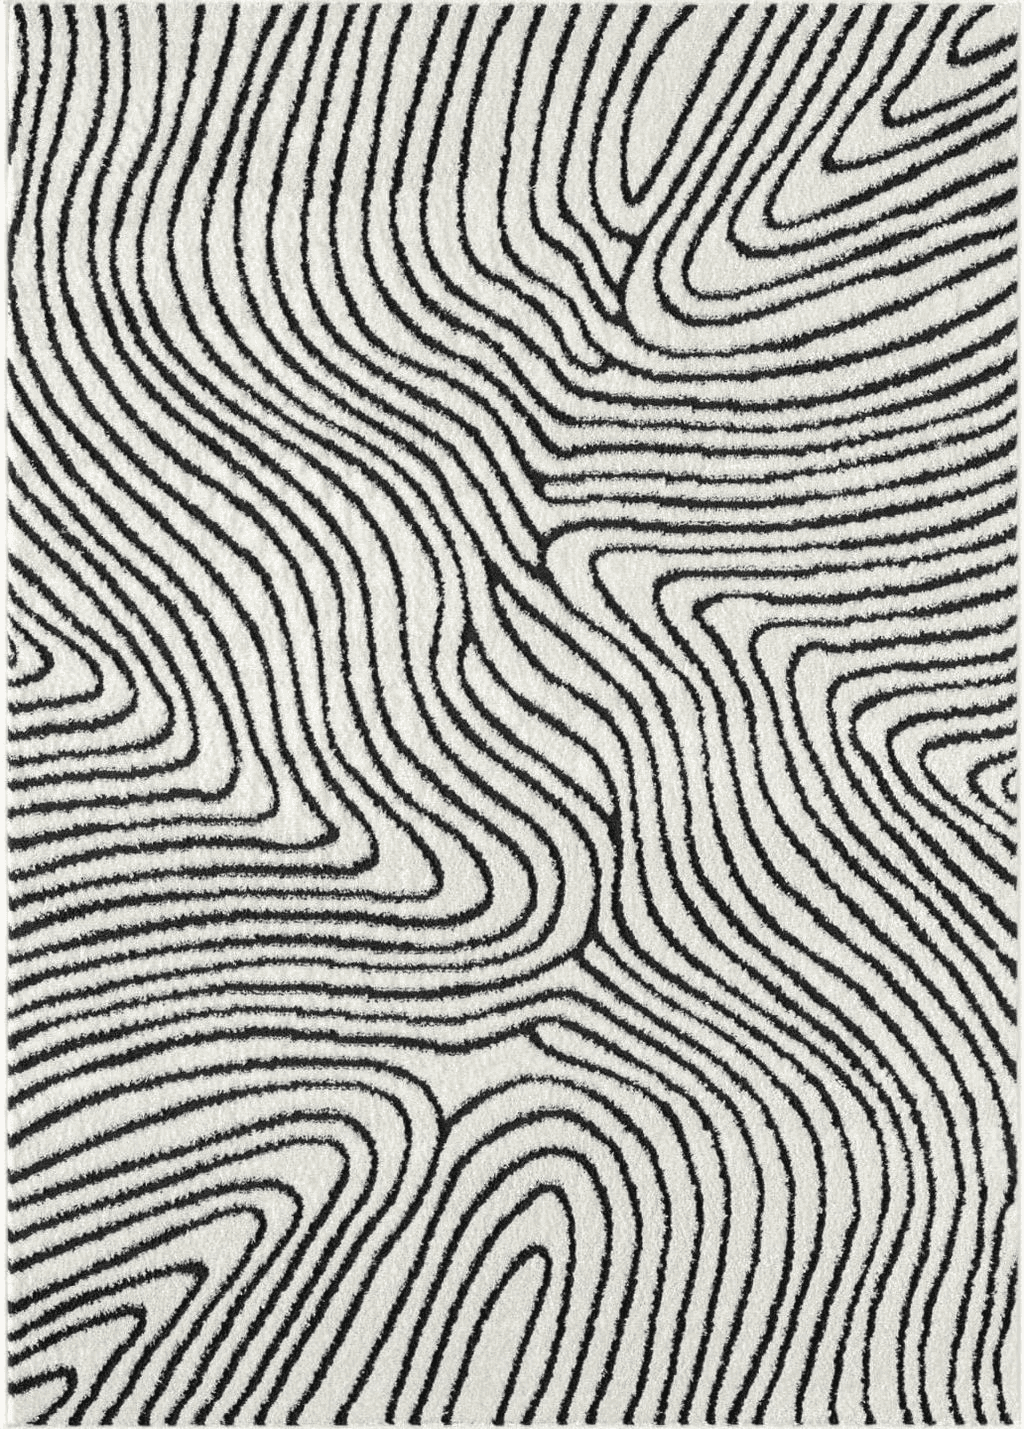 Area Black White LUXE WEAVERS Le Monde Collection 8505 Anthracite 5x7 Geometric Marble Swirl Area Rug